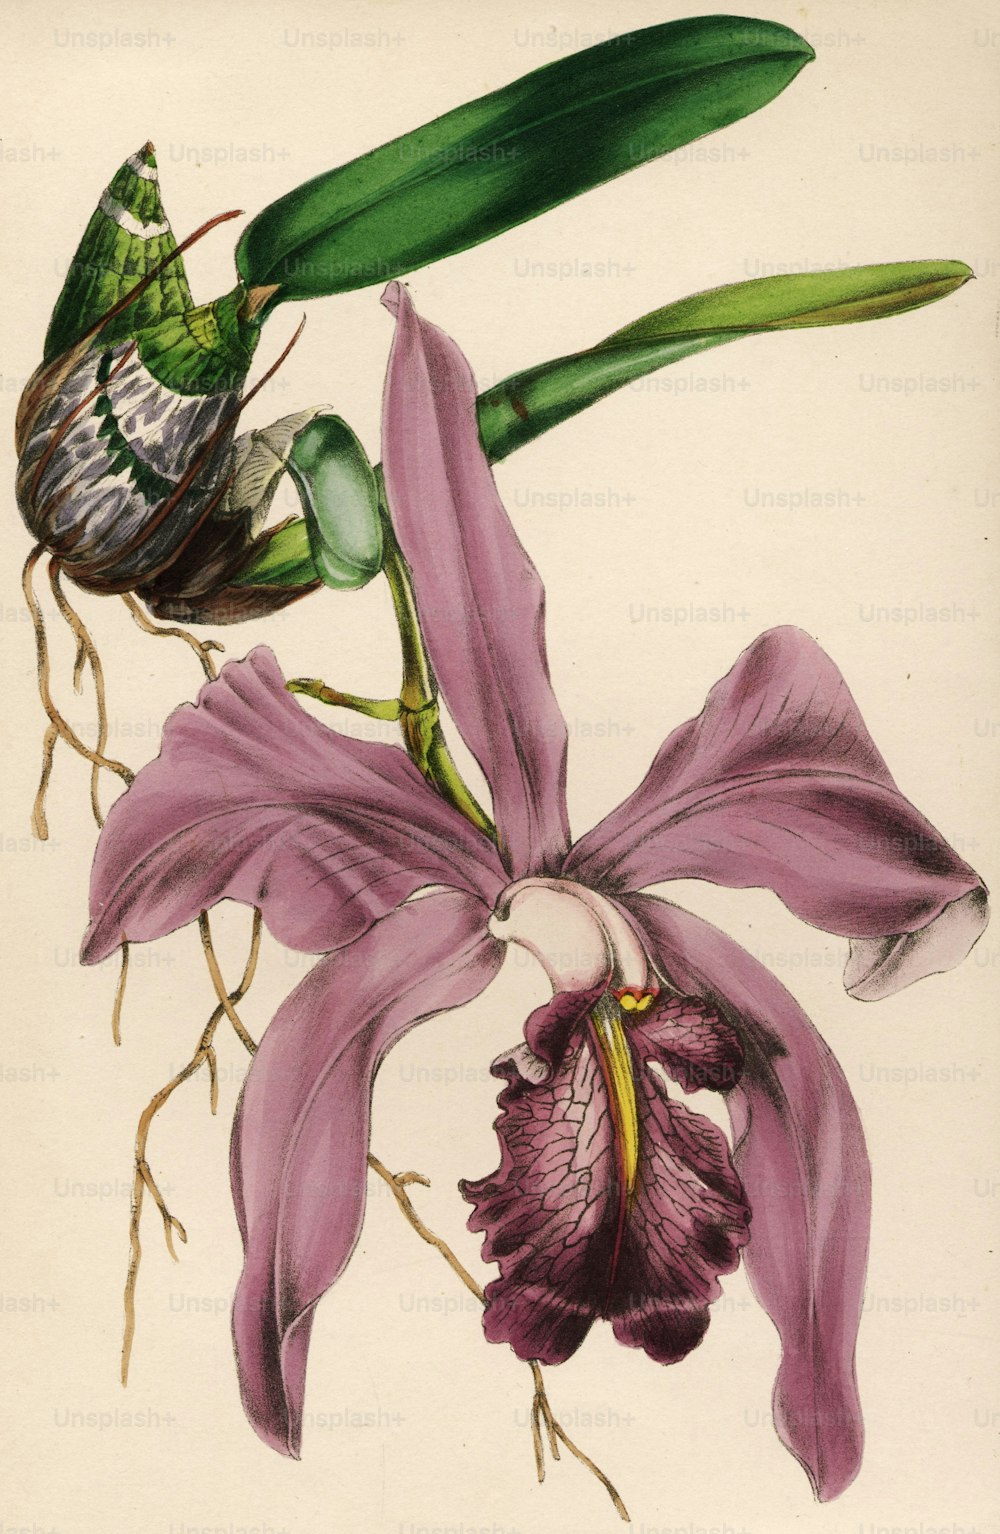 circa 1850:  Laelia majalis  (Photo by Hulton Archive/Getty Images)